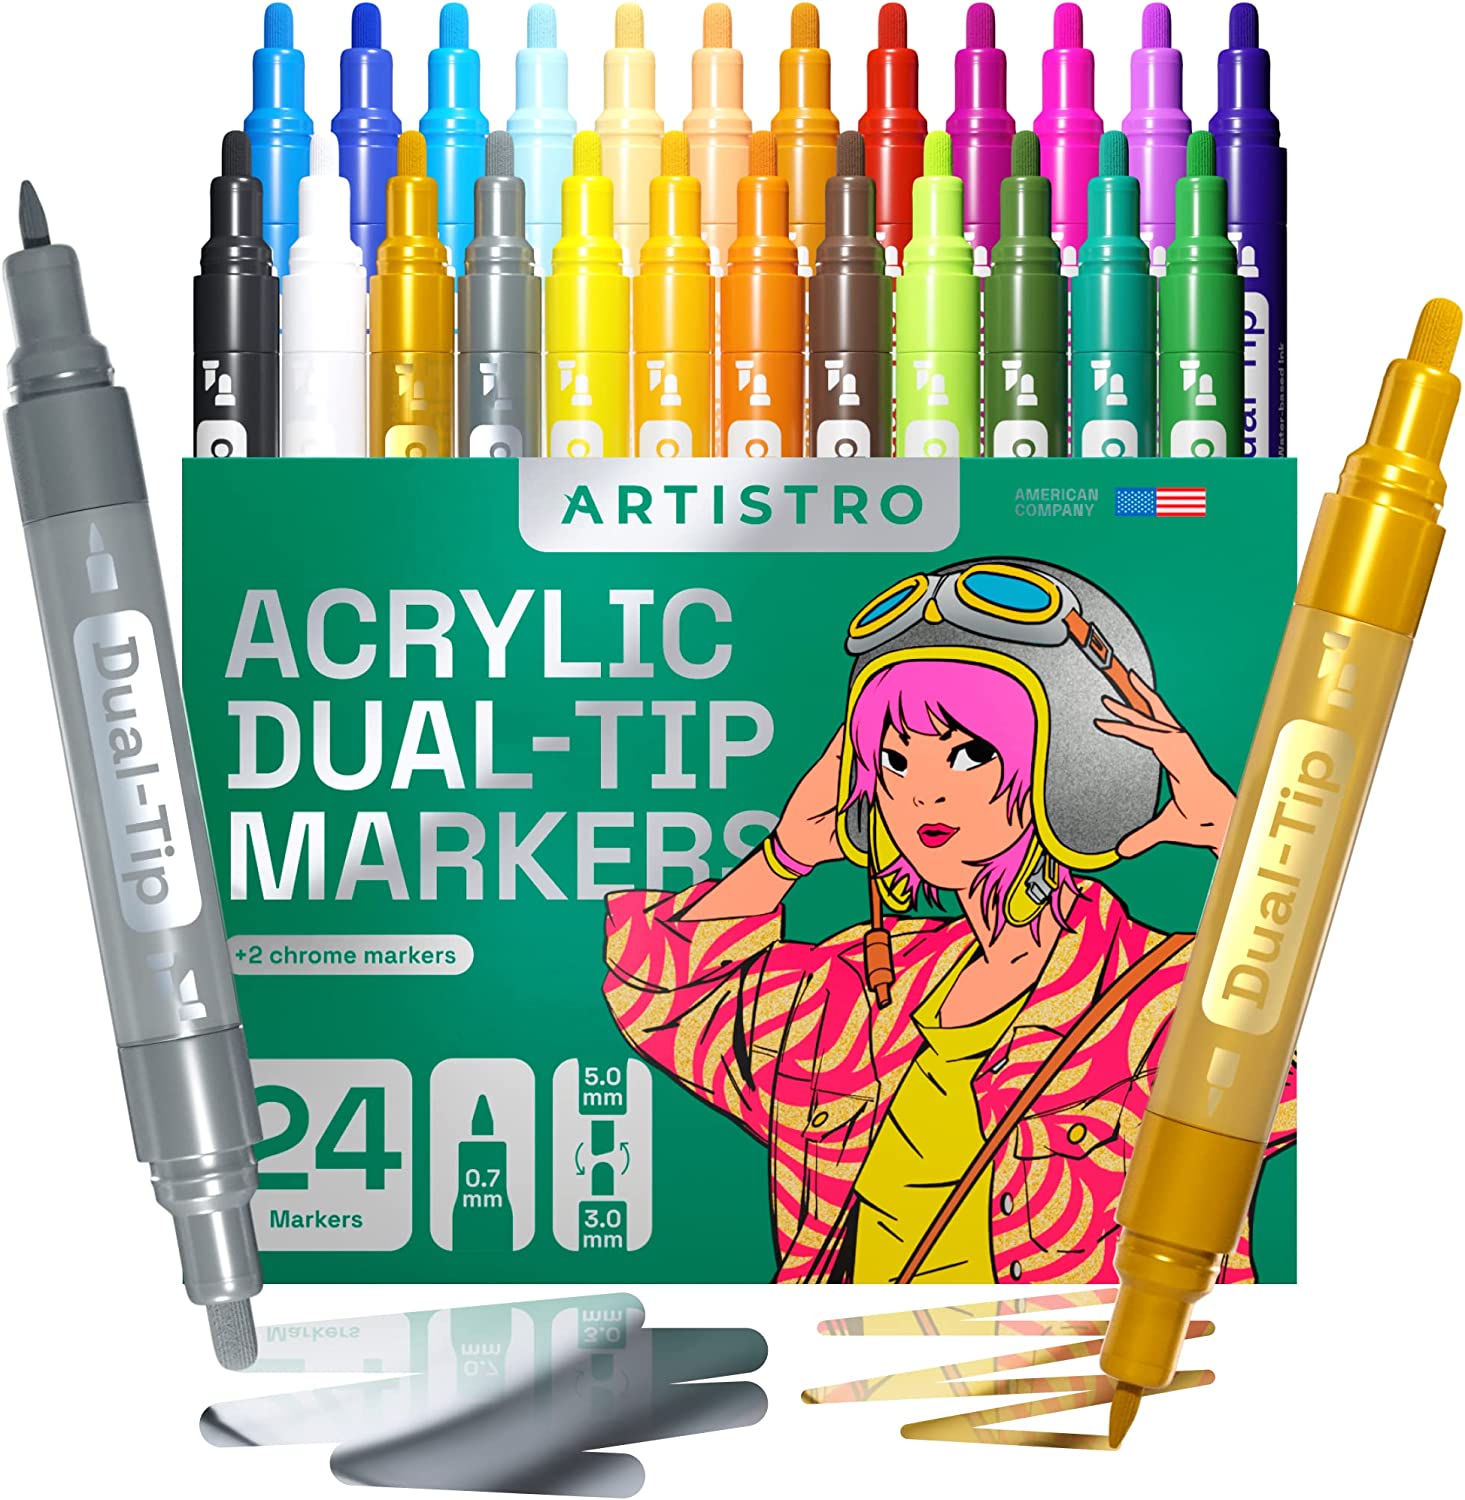 product 24 Dual-Tip Acrylic Paint Markers - front view